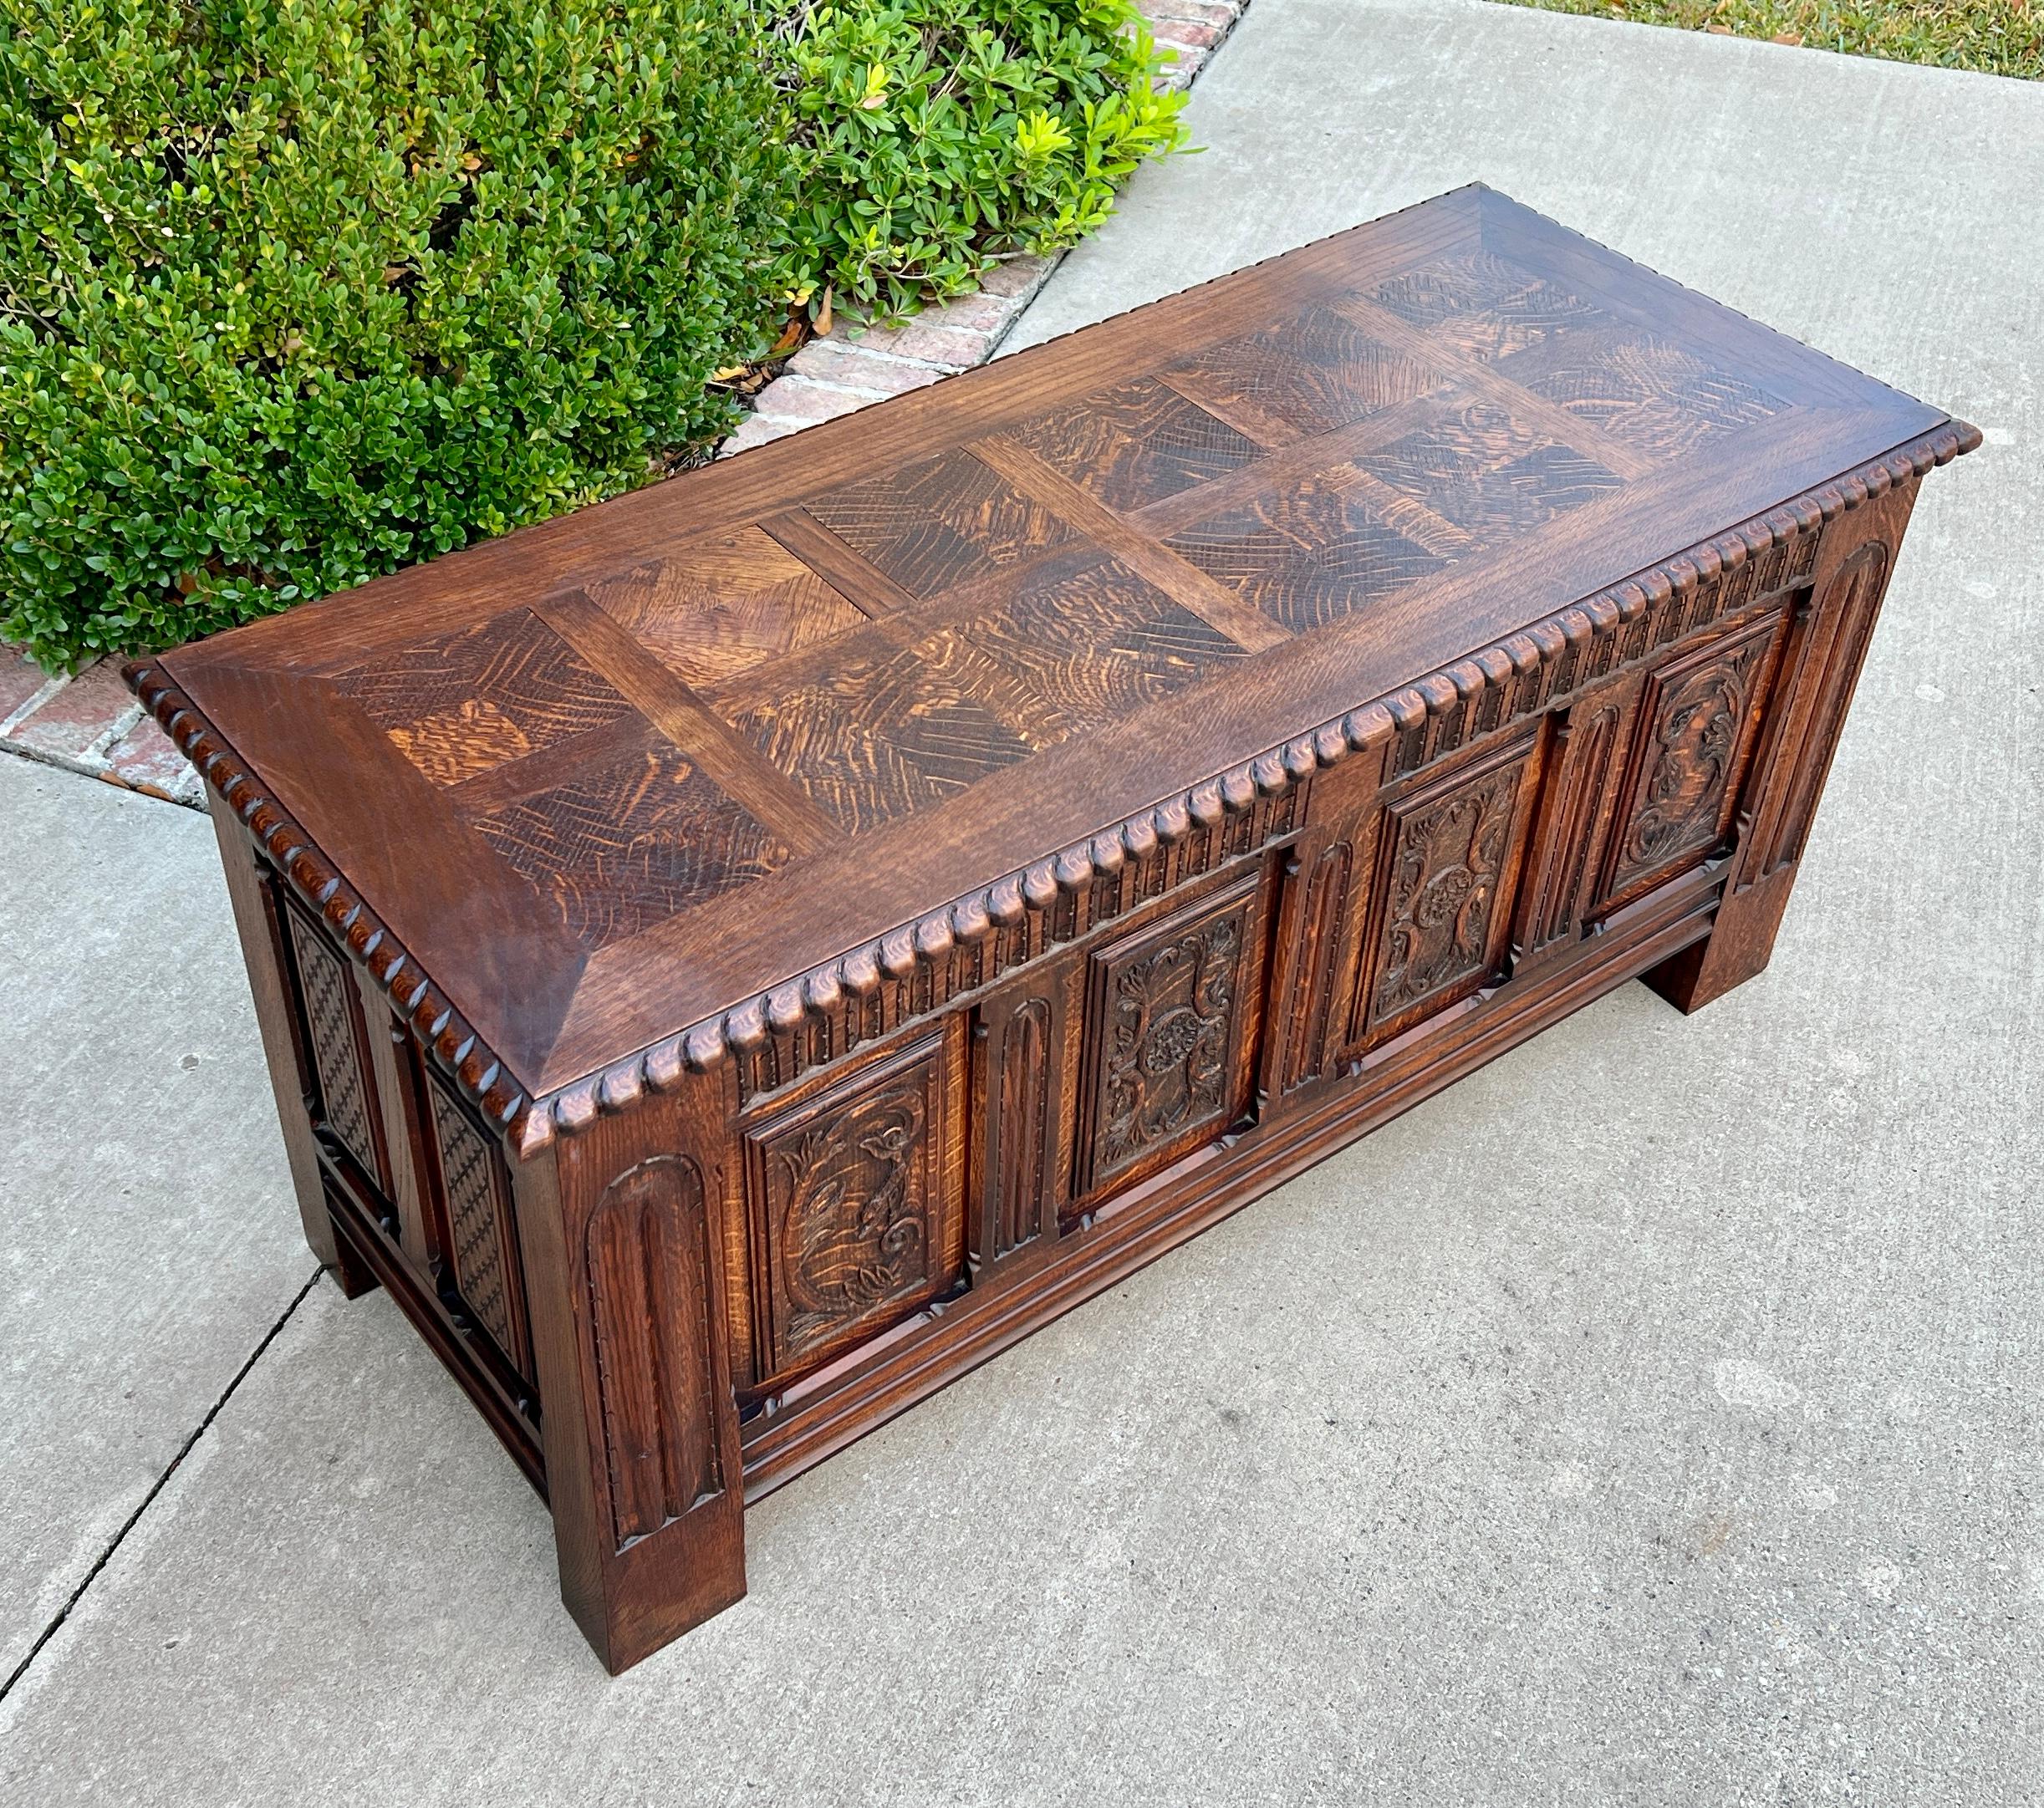 Carved Antique French Blanket Box Chest Trunk Coffee Table Storage Chest Coffer Oak